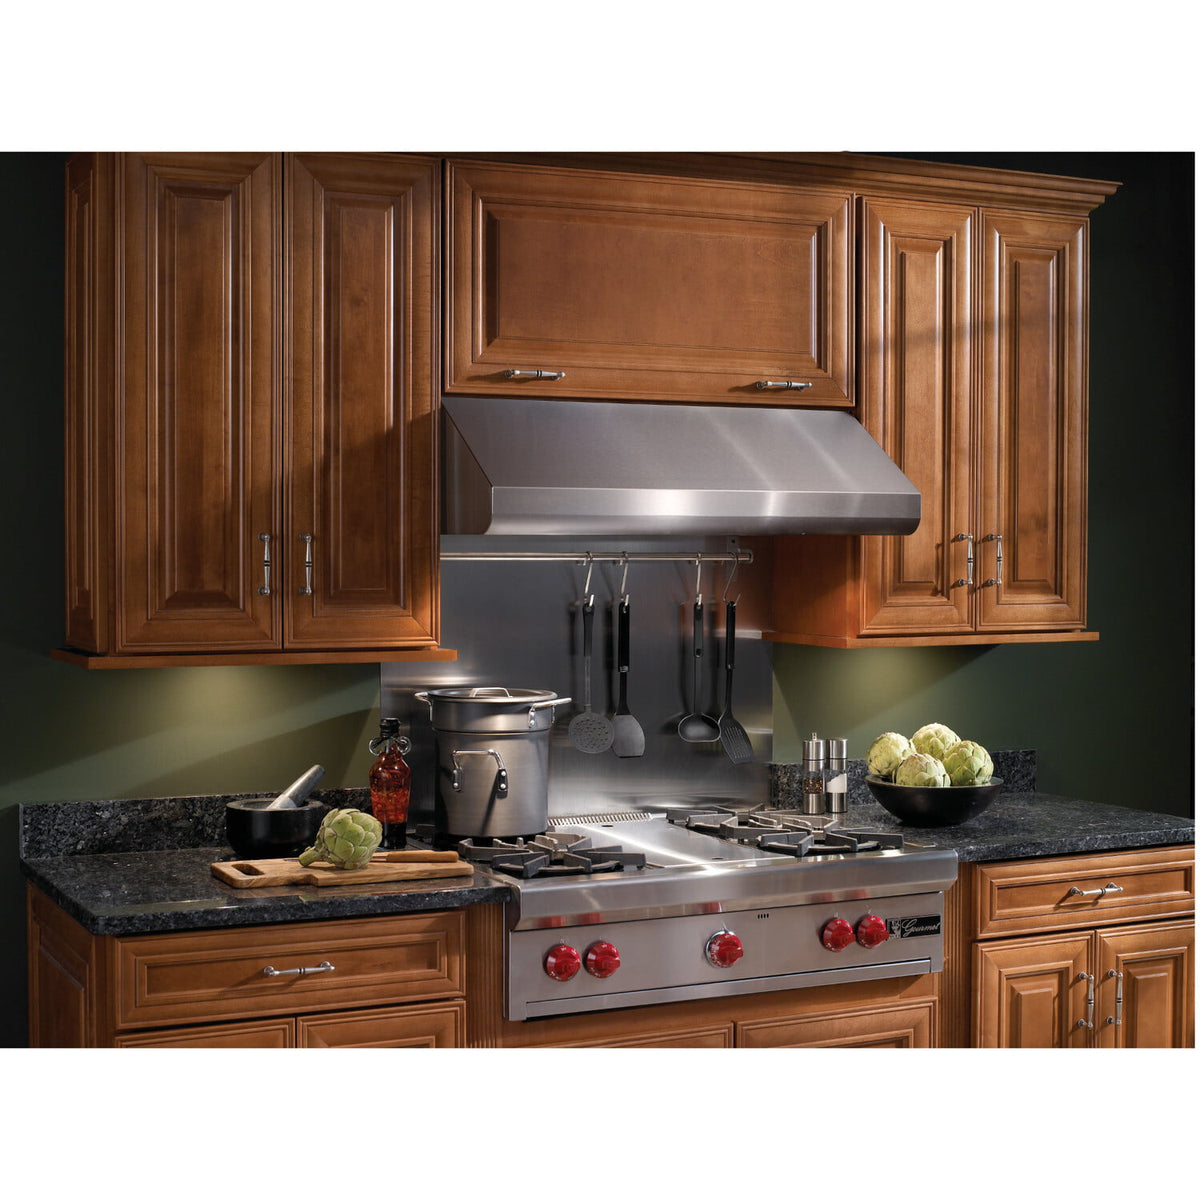 Upgraded 600 CFM Range Hood 30 inch, Under Cabinet Range Hood for  Duct/Ductless Convertible, Stainless Steel Kitchen Stove Vent with 3 Speed  Kitchen